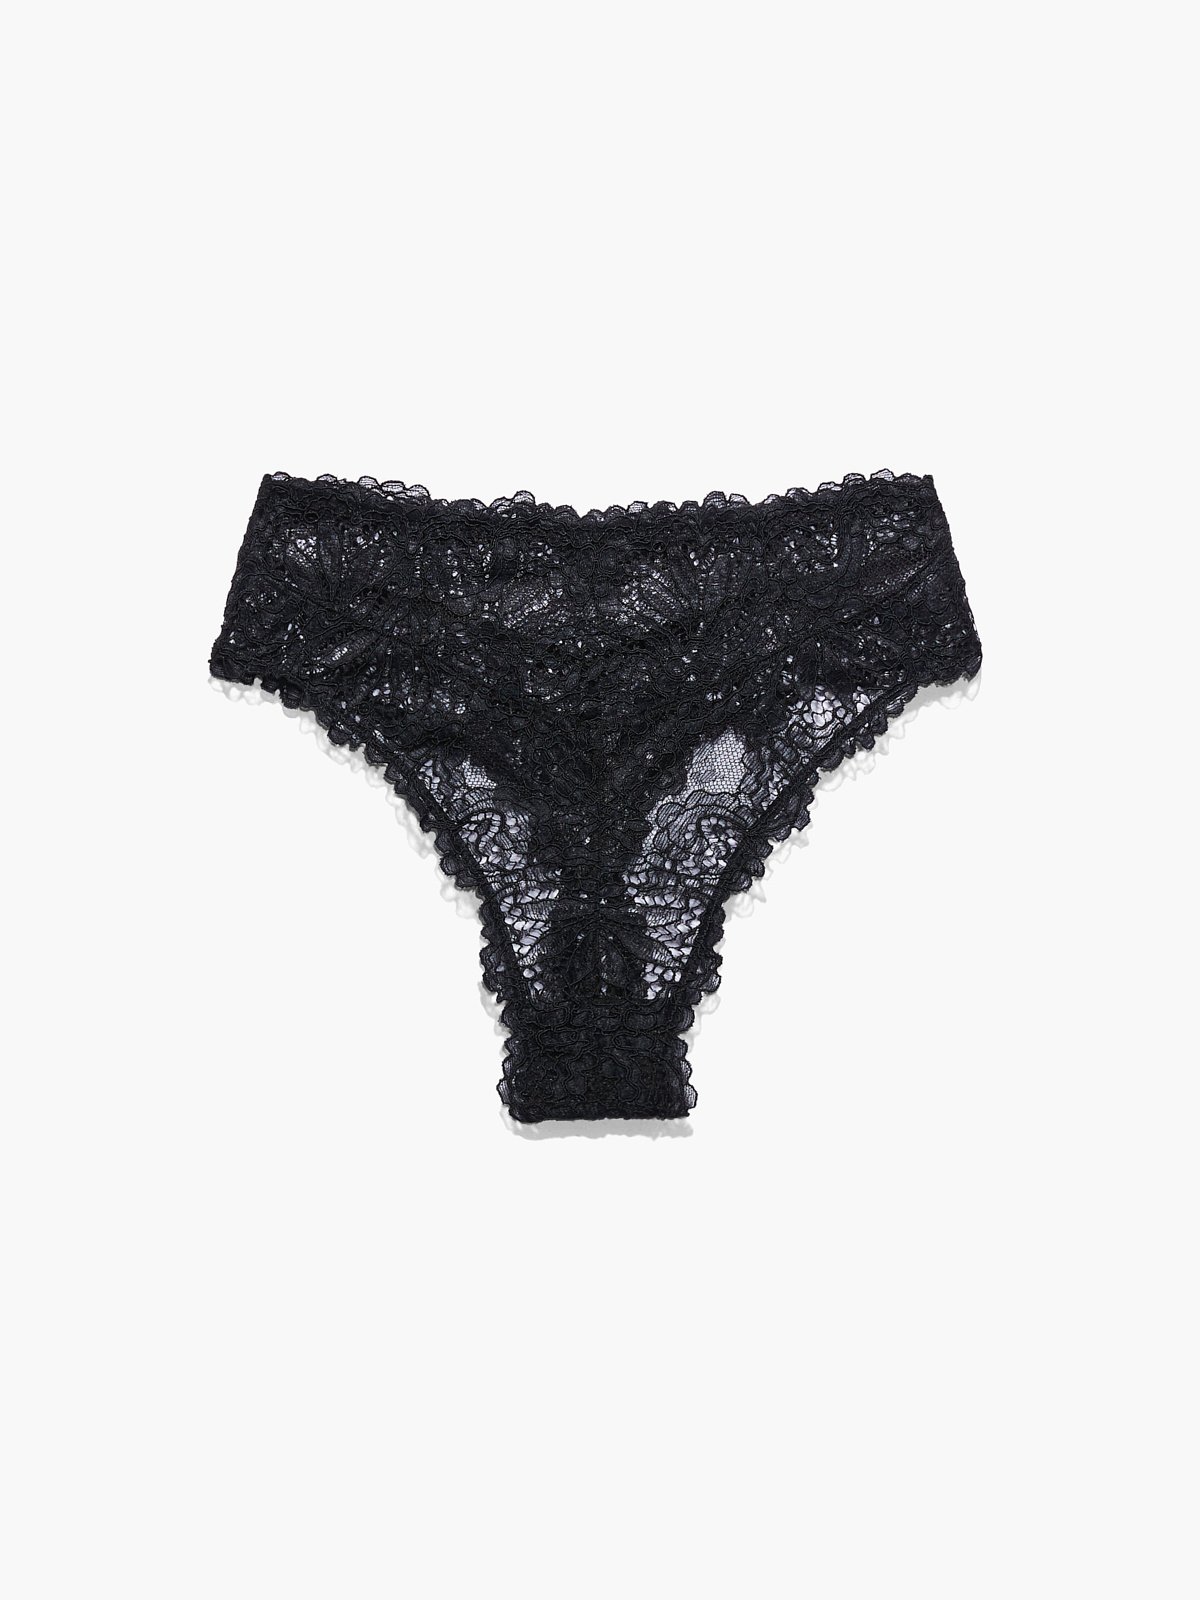 Forever 21 lace waist low rise cotton thong panties S M black nwt